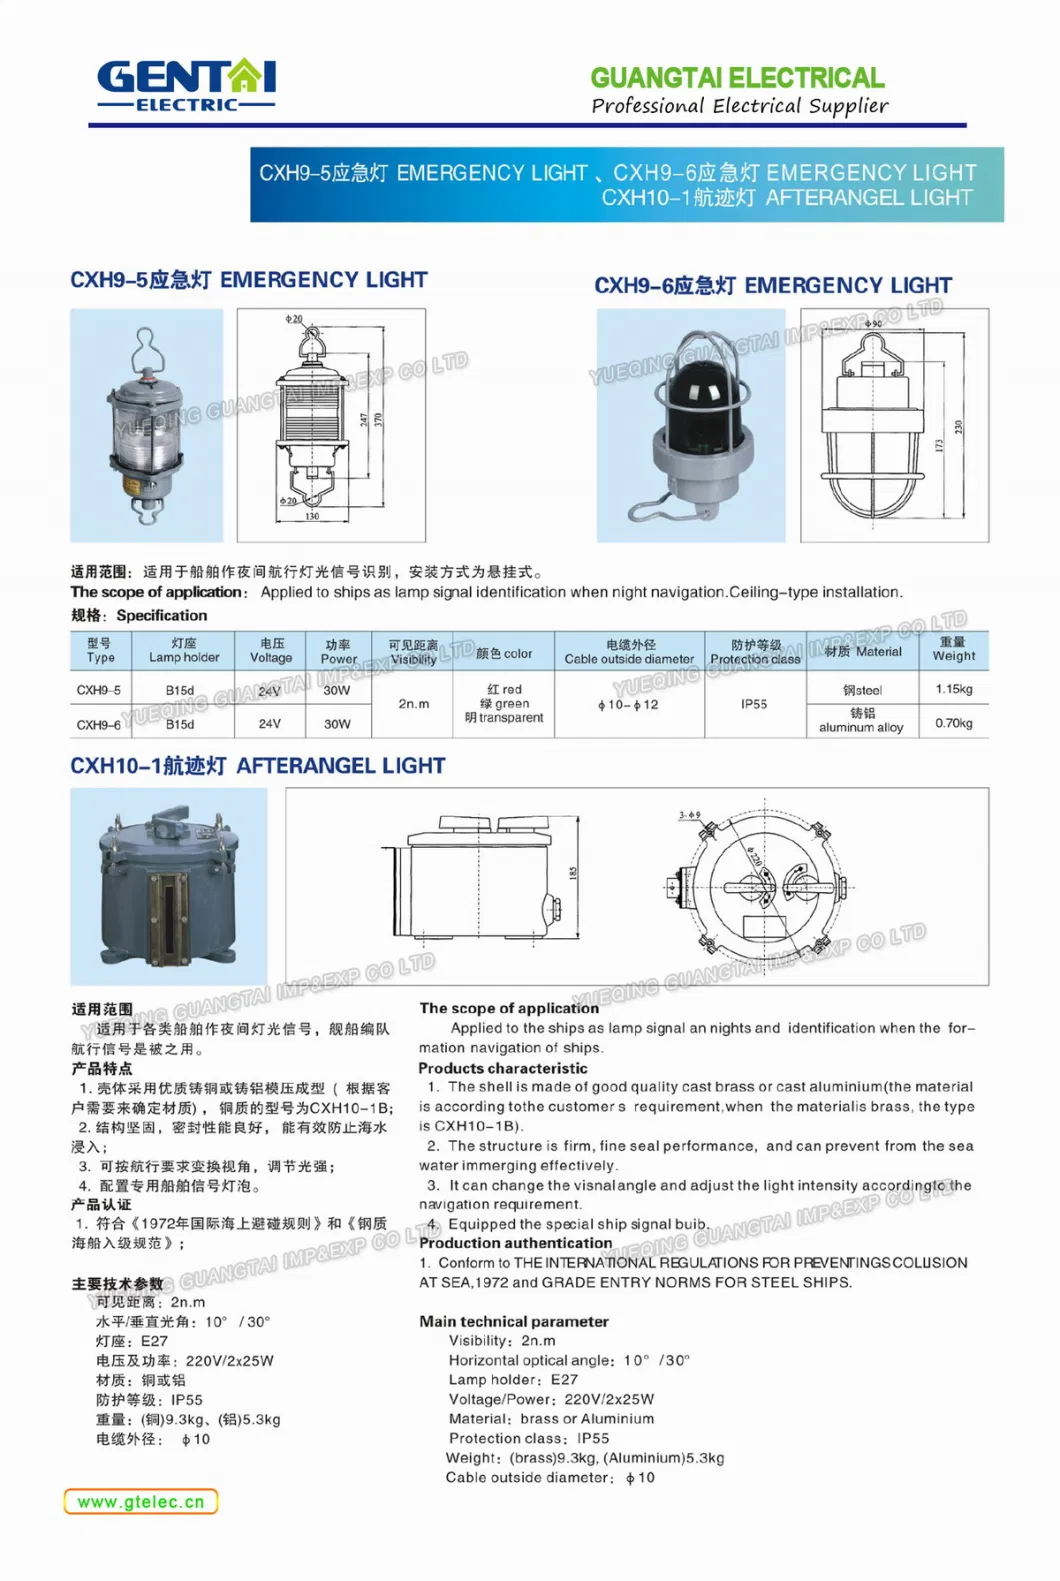 Best Quality Cxh13 Flagpole Light for Ship